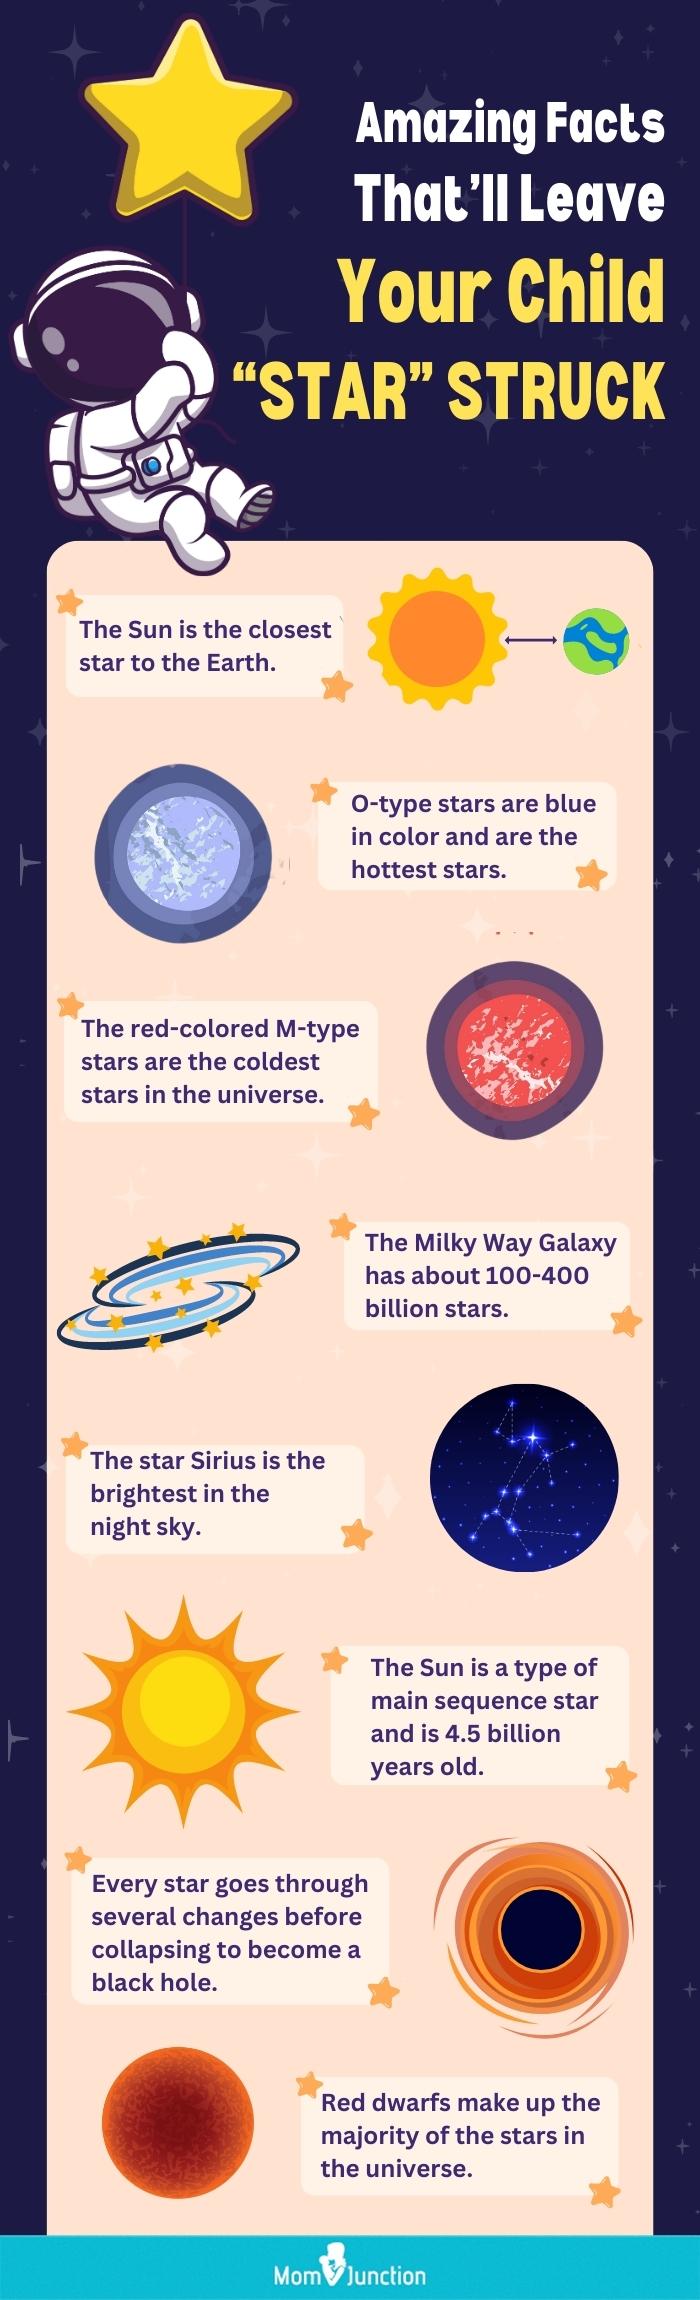 Star Facts 🌟 - Interesting Facts about Stars